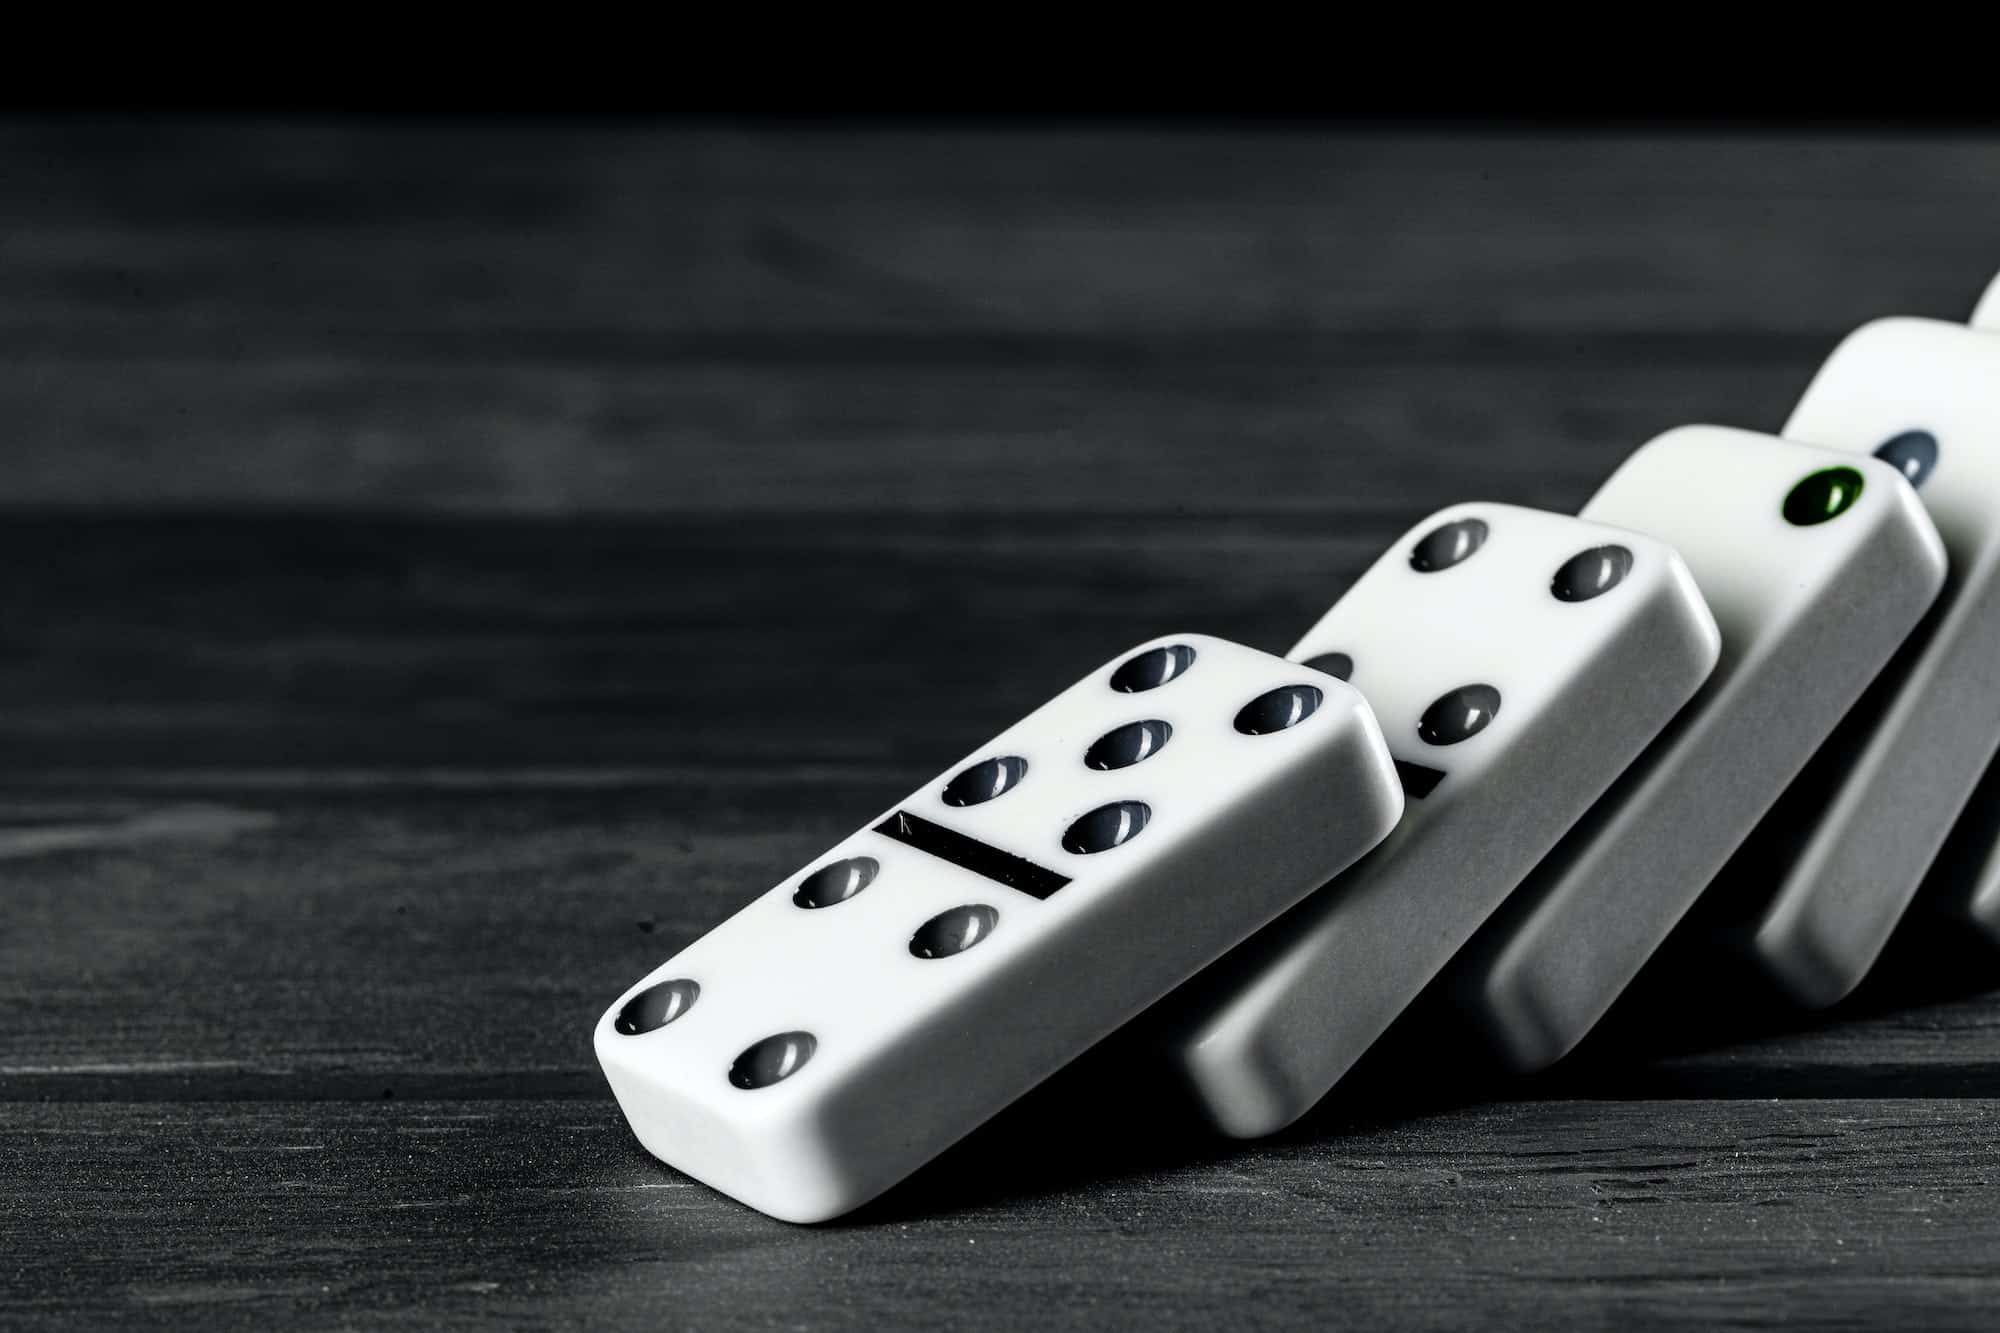 Domino game. Dominoes on a black table